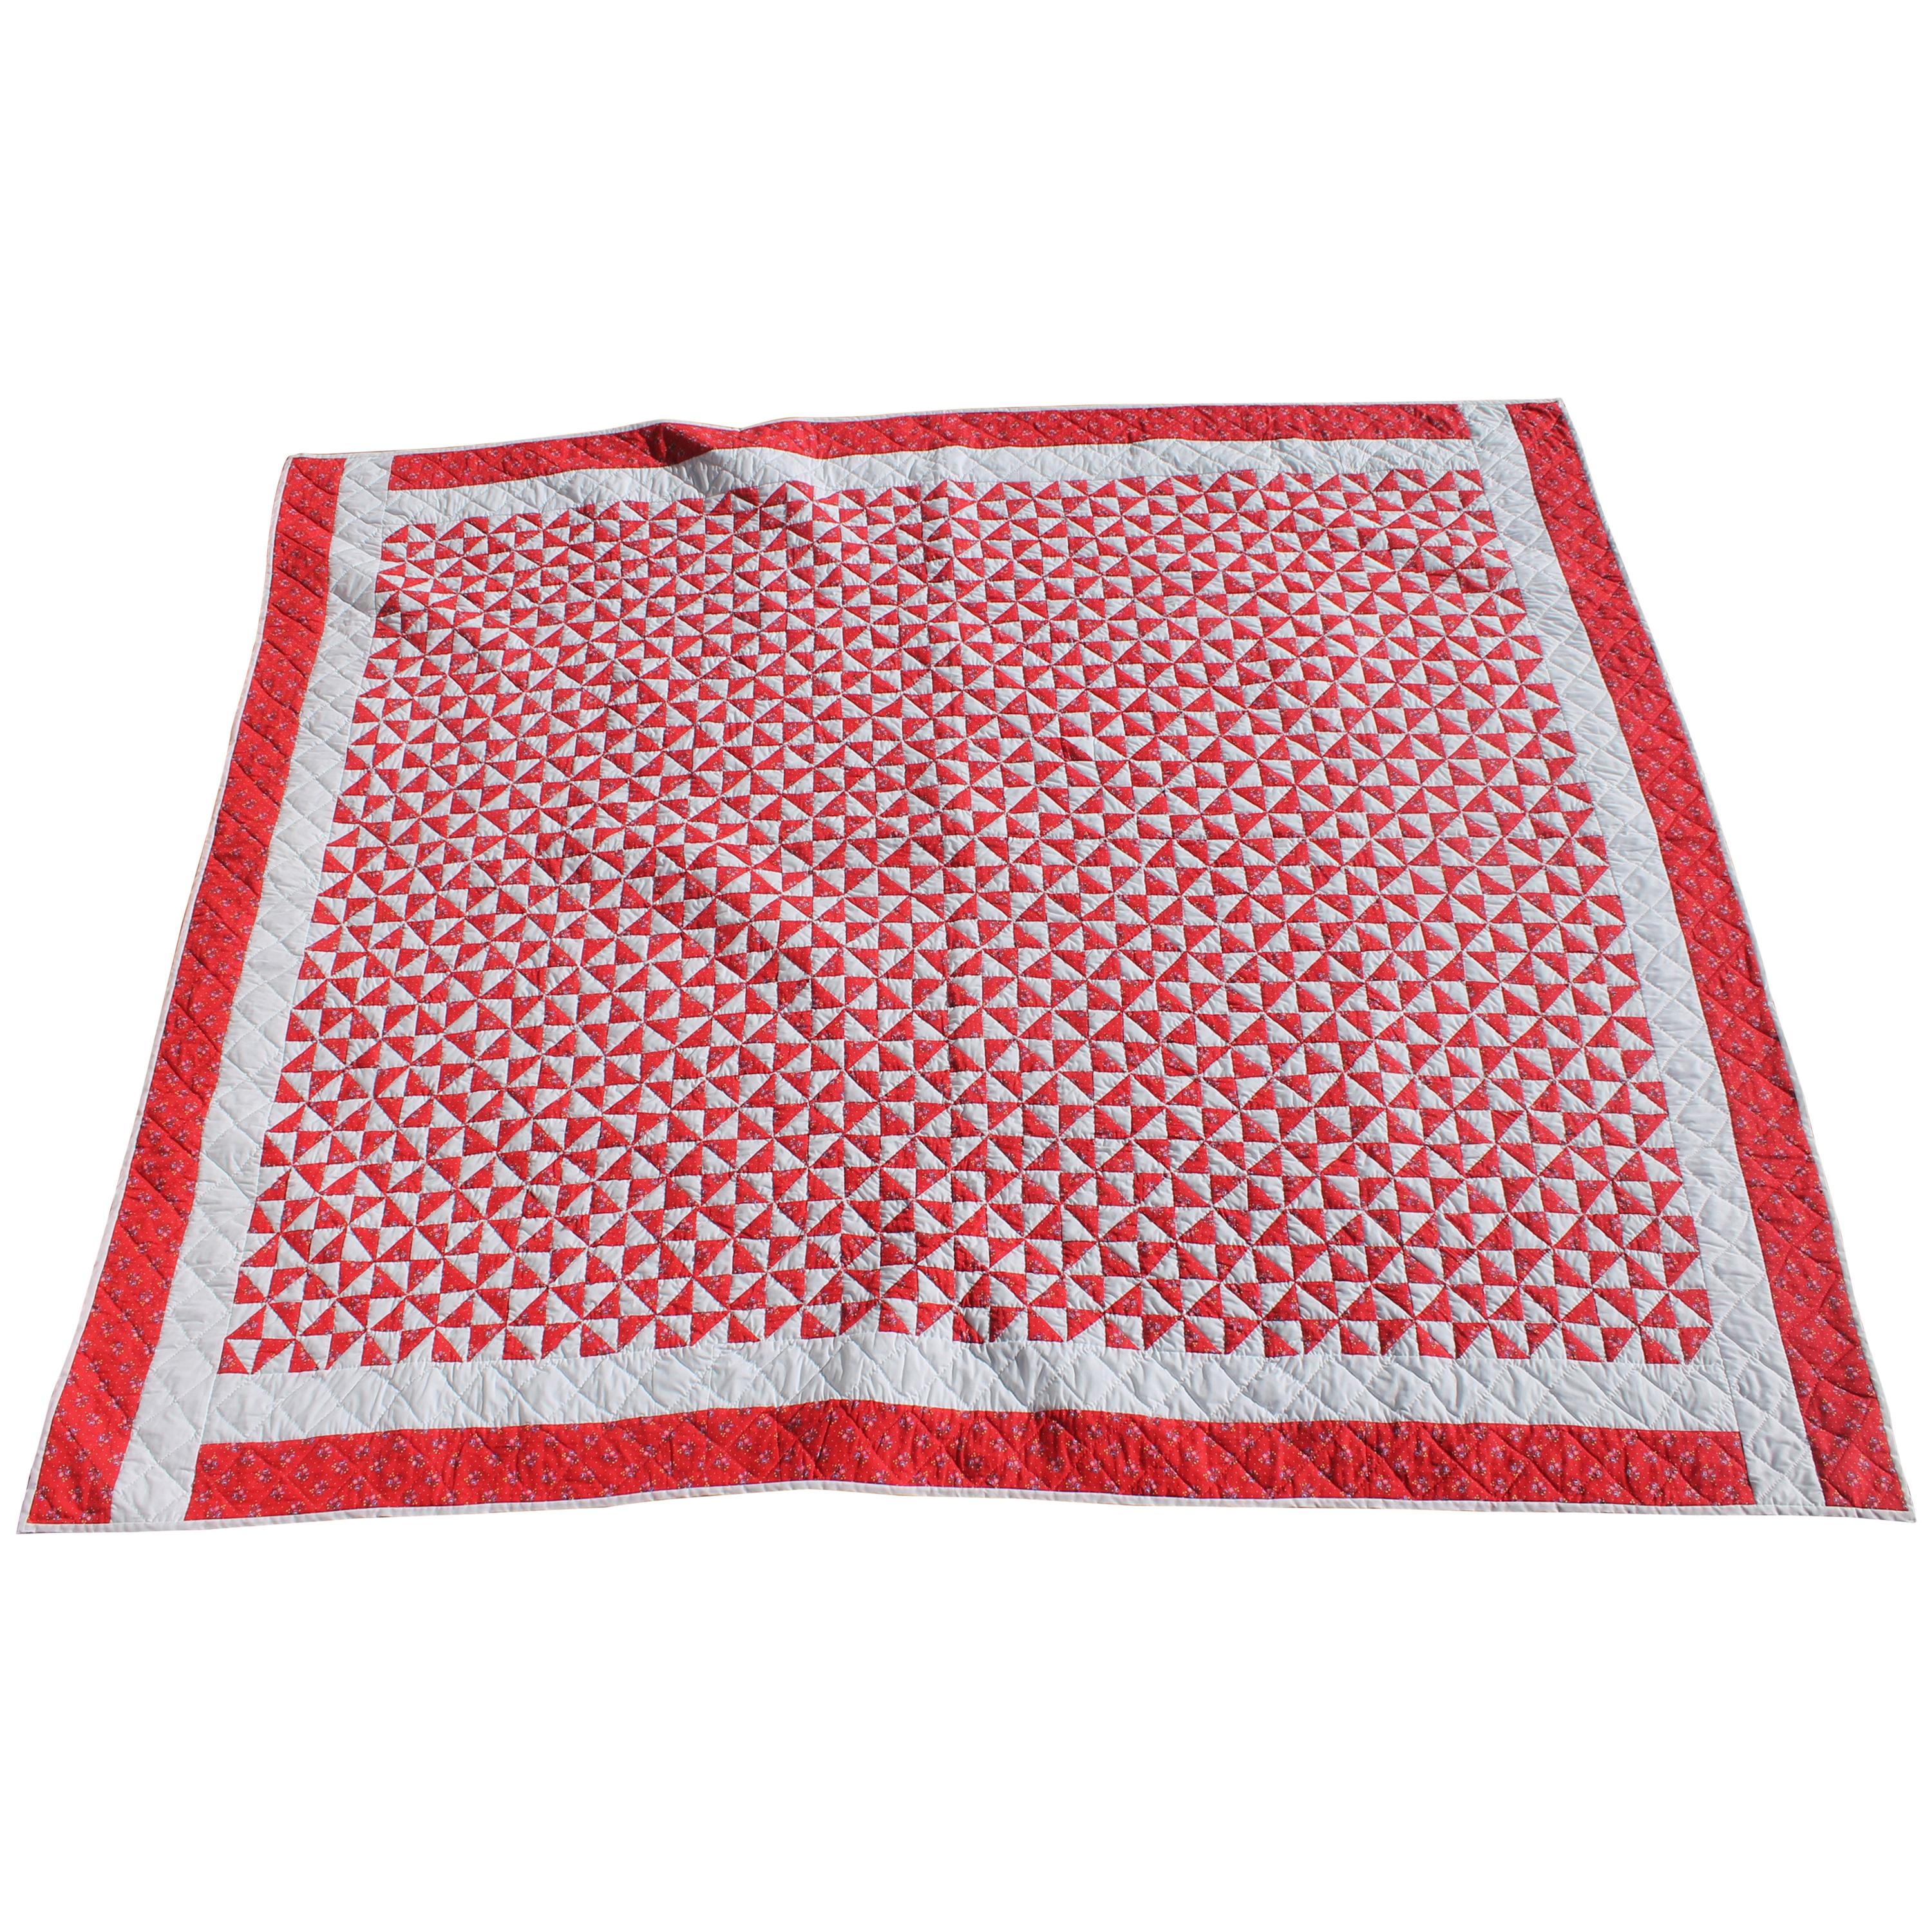 Antique Quilt - 20th Century Mini-Triangles Quilt Red and White